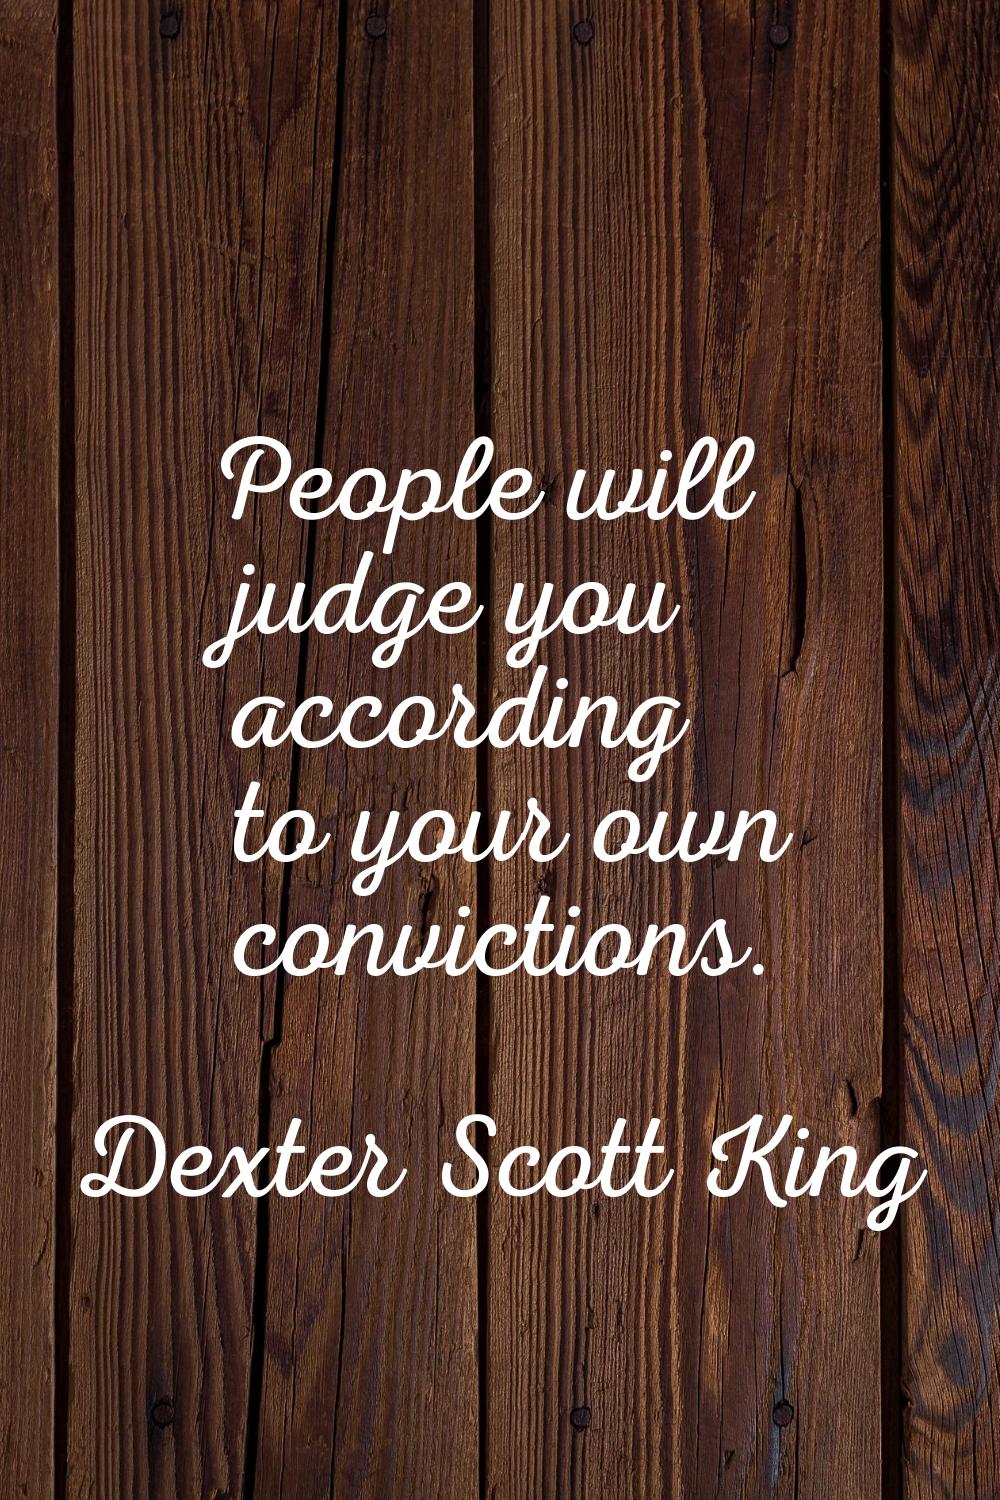 People will judge you according to your own convictions.